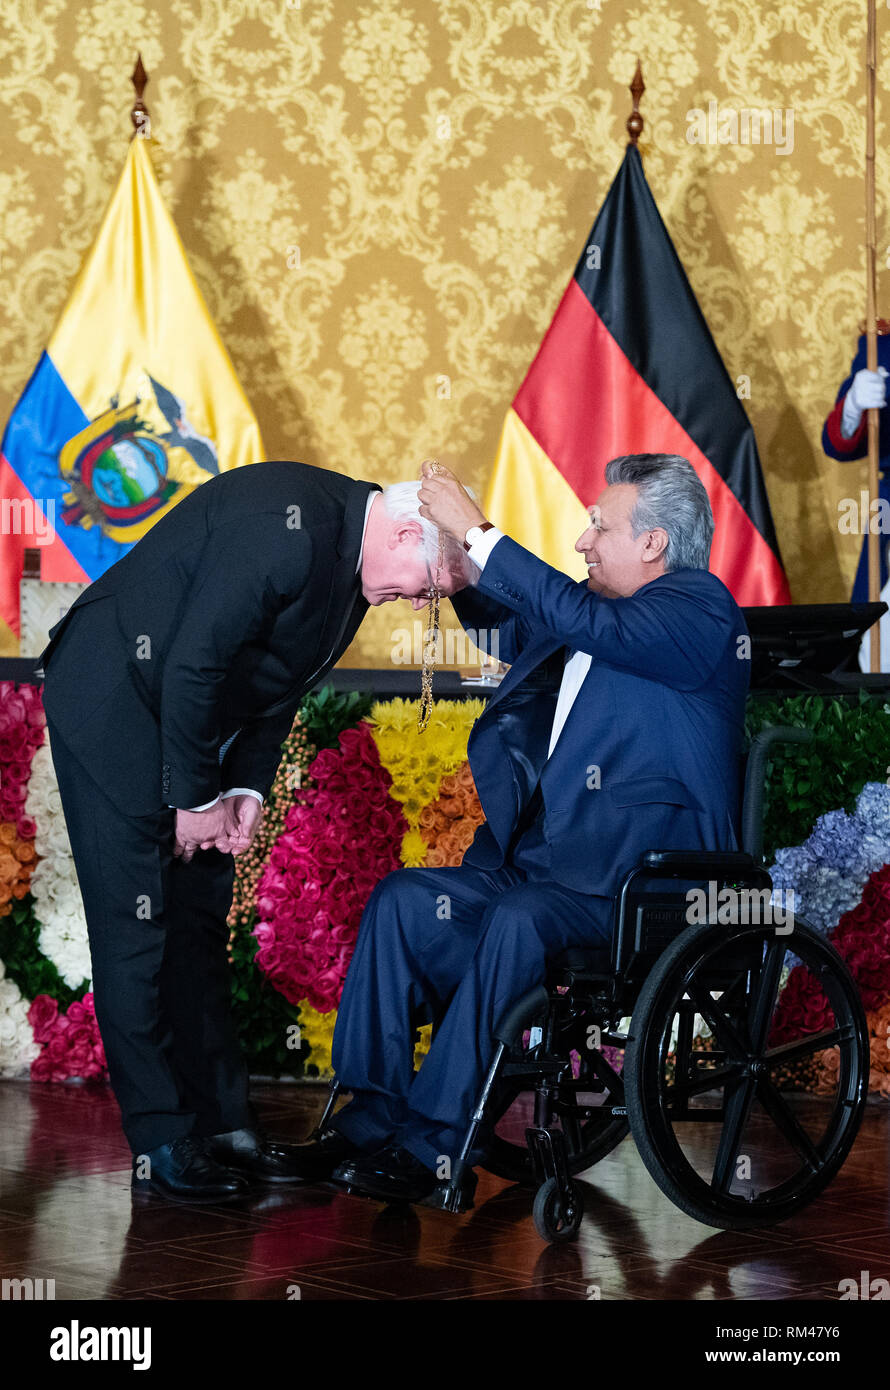 13 February 2019, Ecuador, Quito: President Frank-Walter Steinmeier (l) is awarded a medal by Lenin Voltaire Moreno Garces, President of Ecuador, in the Palacio de Carondelet, the presidential palace. Federal President Steinmeier and his wife are visiting Colombia and Ecuador on the occasion of Alexander von Humboldt's 250th birthday as part of a five-day trip to Latin America. Photo: Bernd von Jutrczenka/dpa Stock Photo